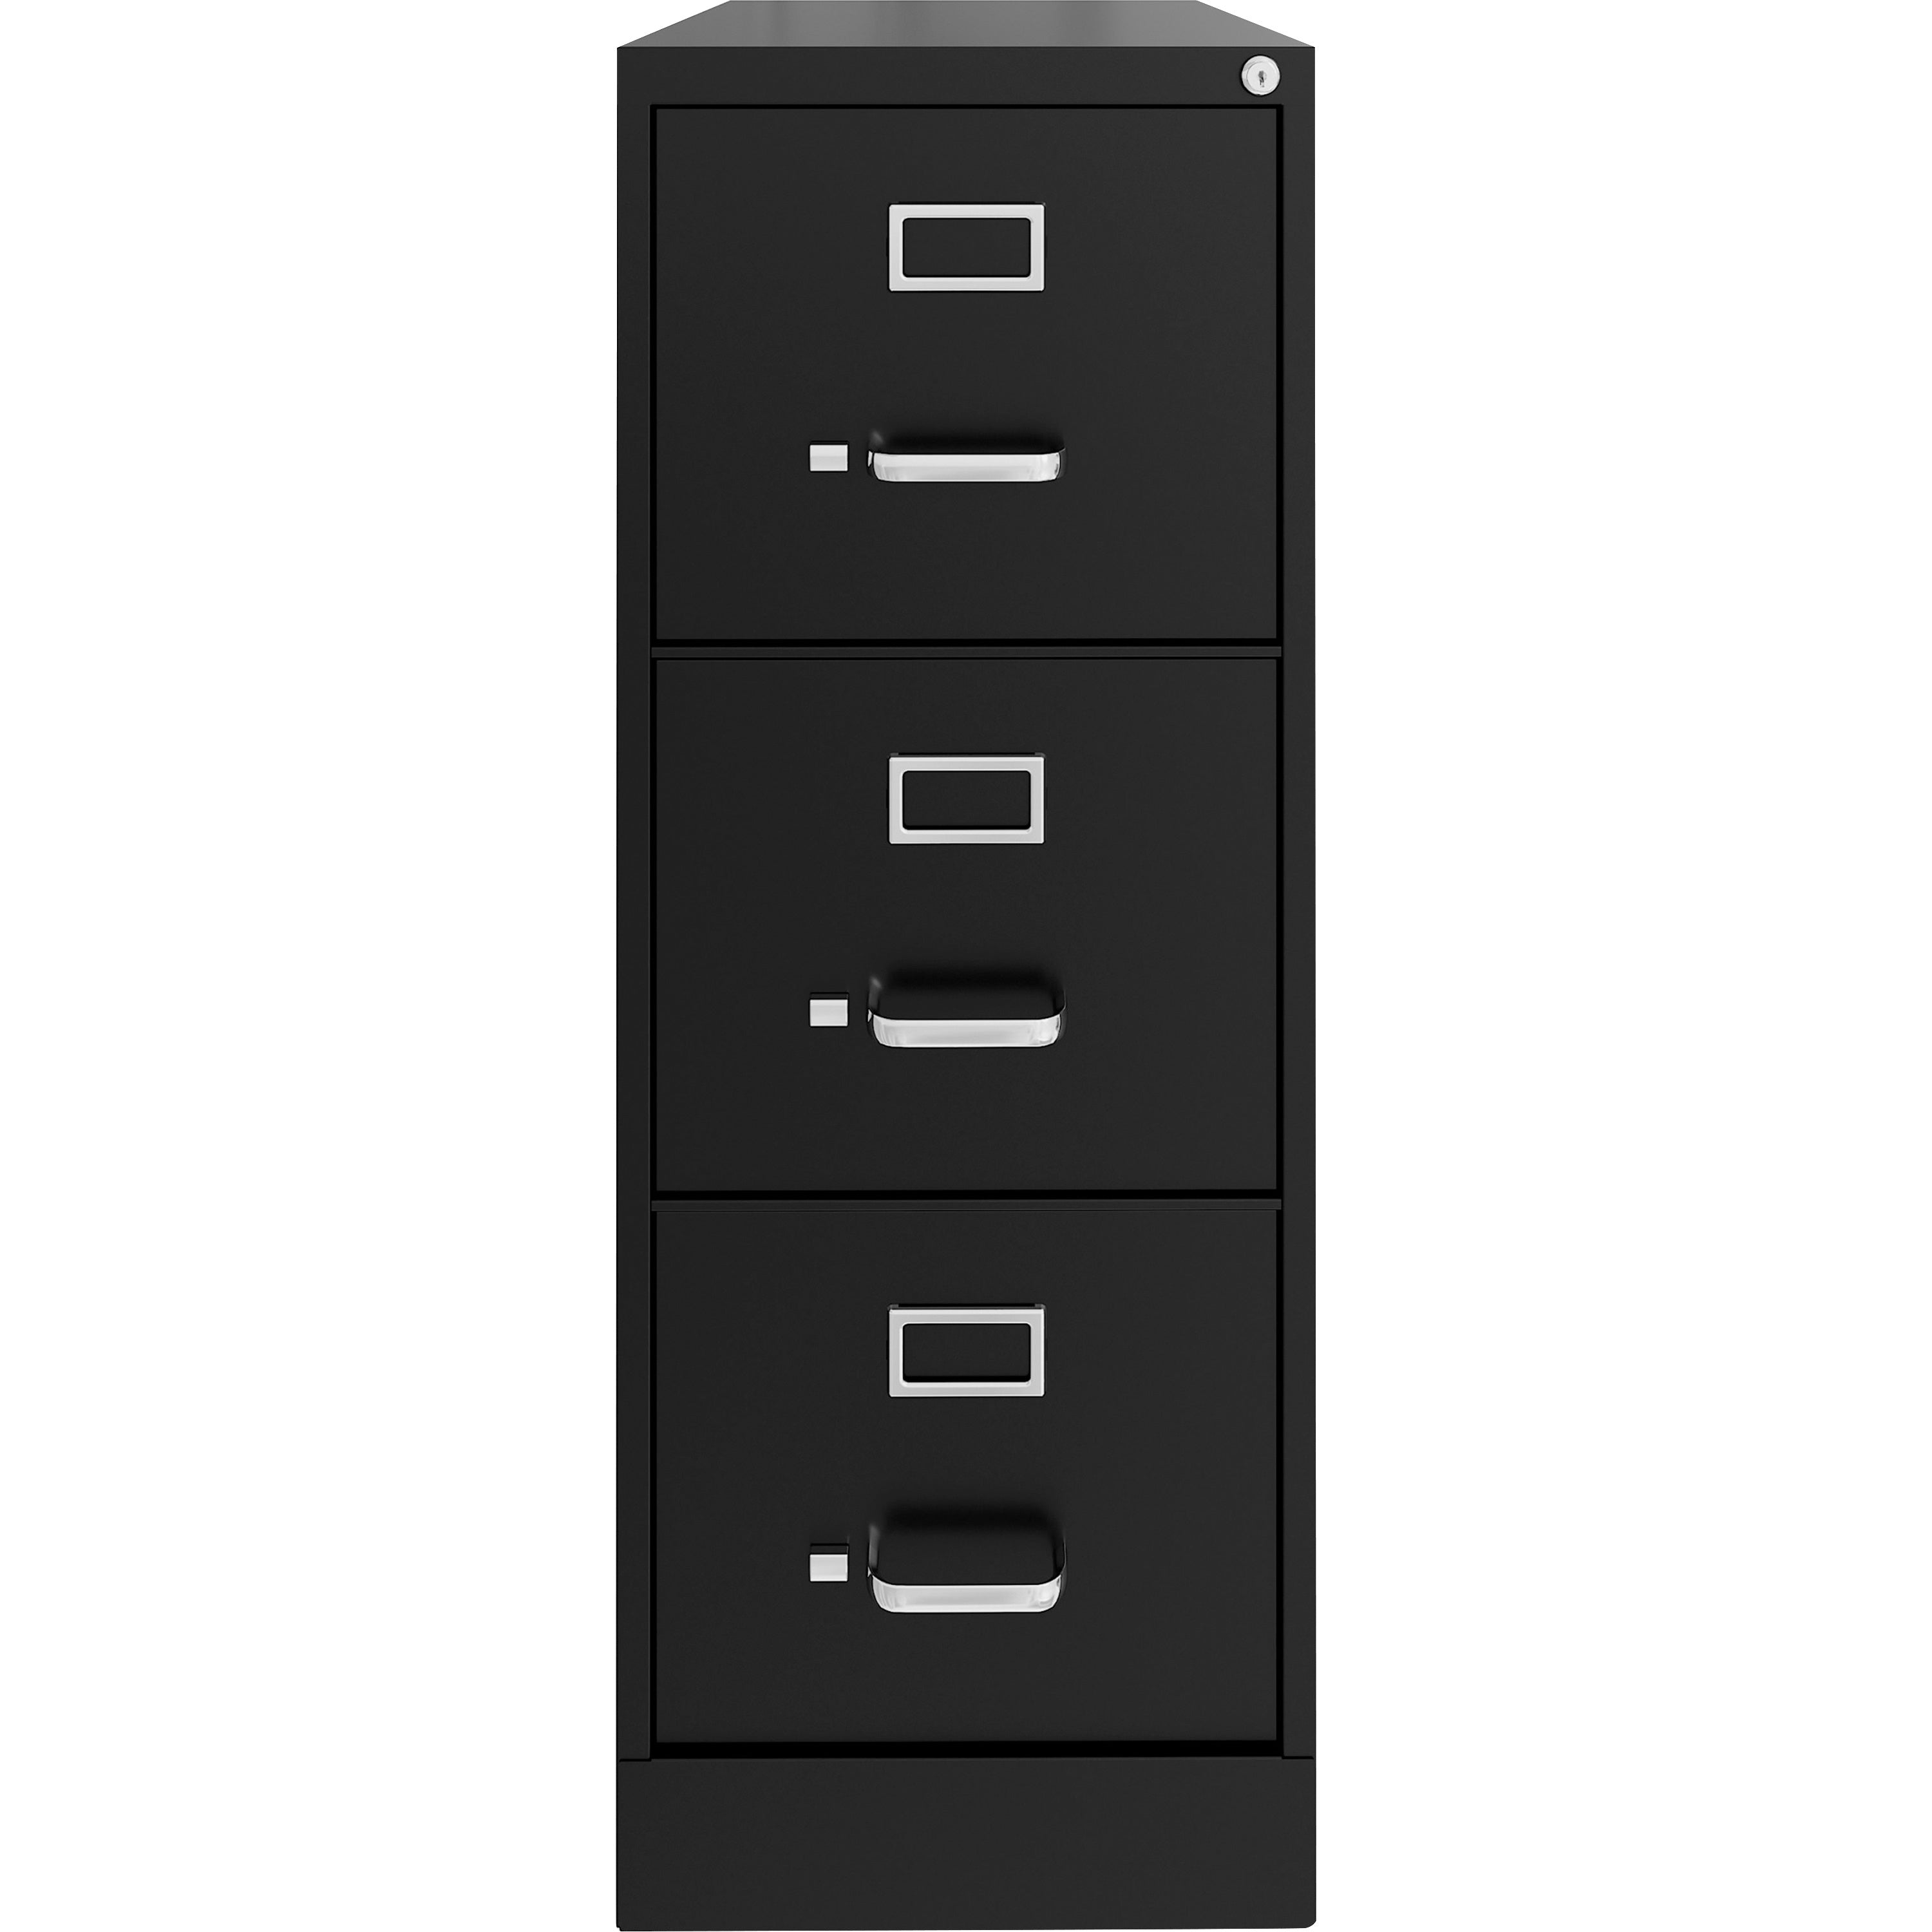 lorell-fortress-series-22-commercial-grade-vertical-file-cabinet-15-x-22-x-402-3-x-drawers-for-file-letter-vertical-ball-bearing-suspension-removable-lock-pull-handle-wire-management-black-steel-recycled_llr42297 - 2